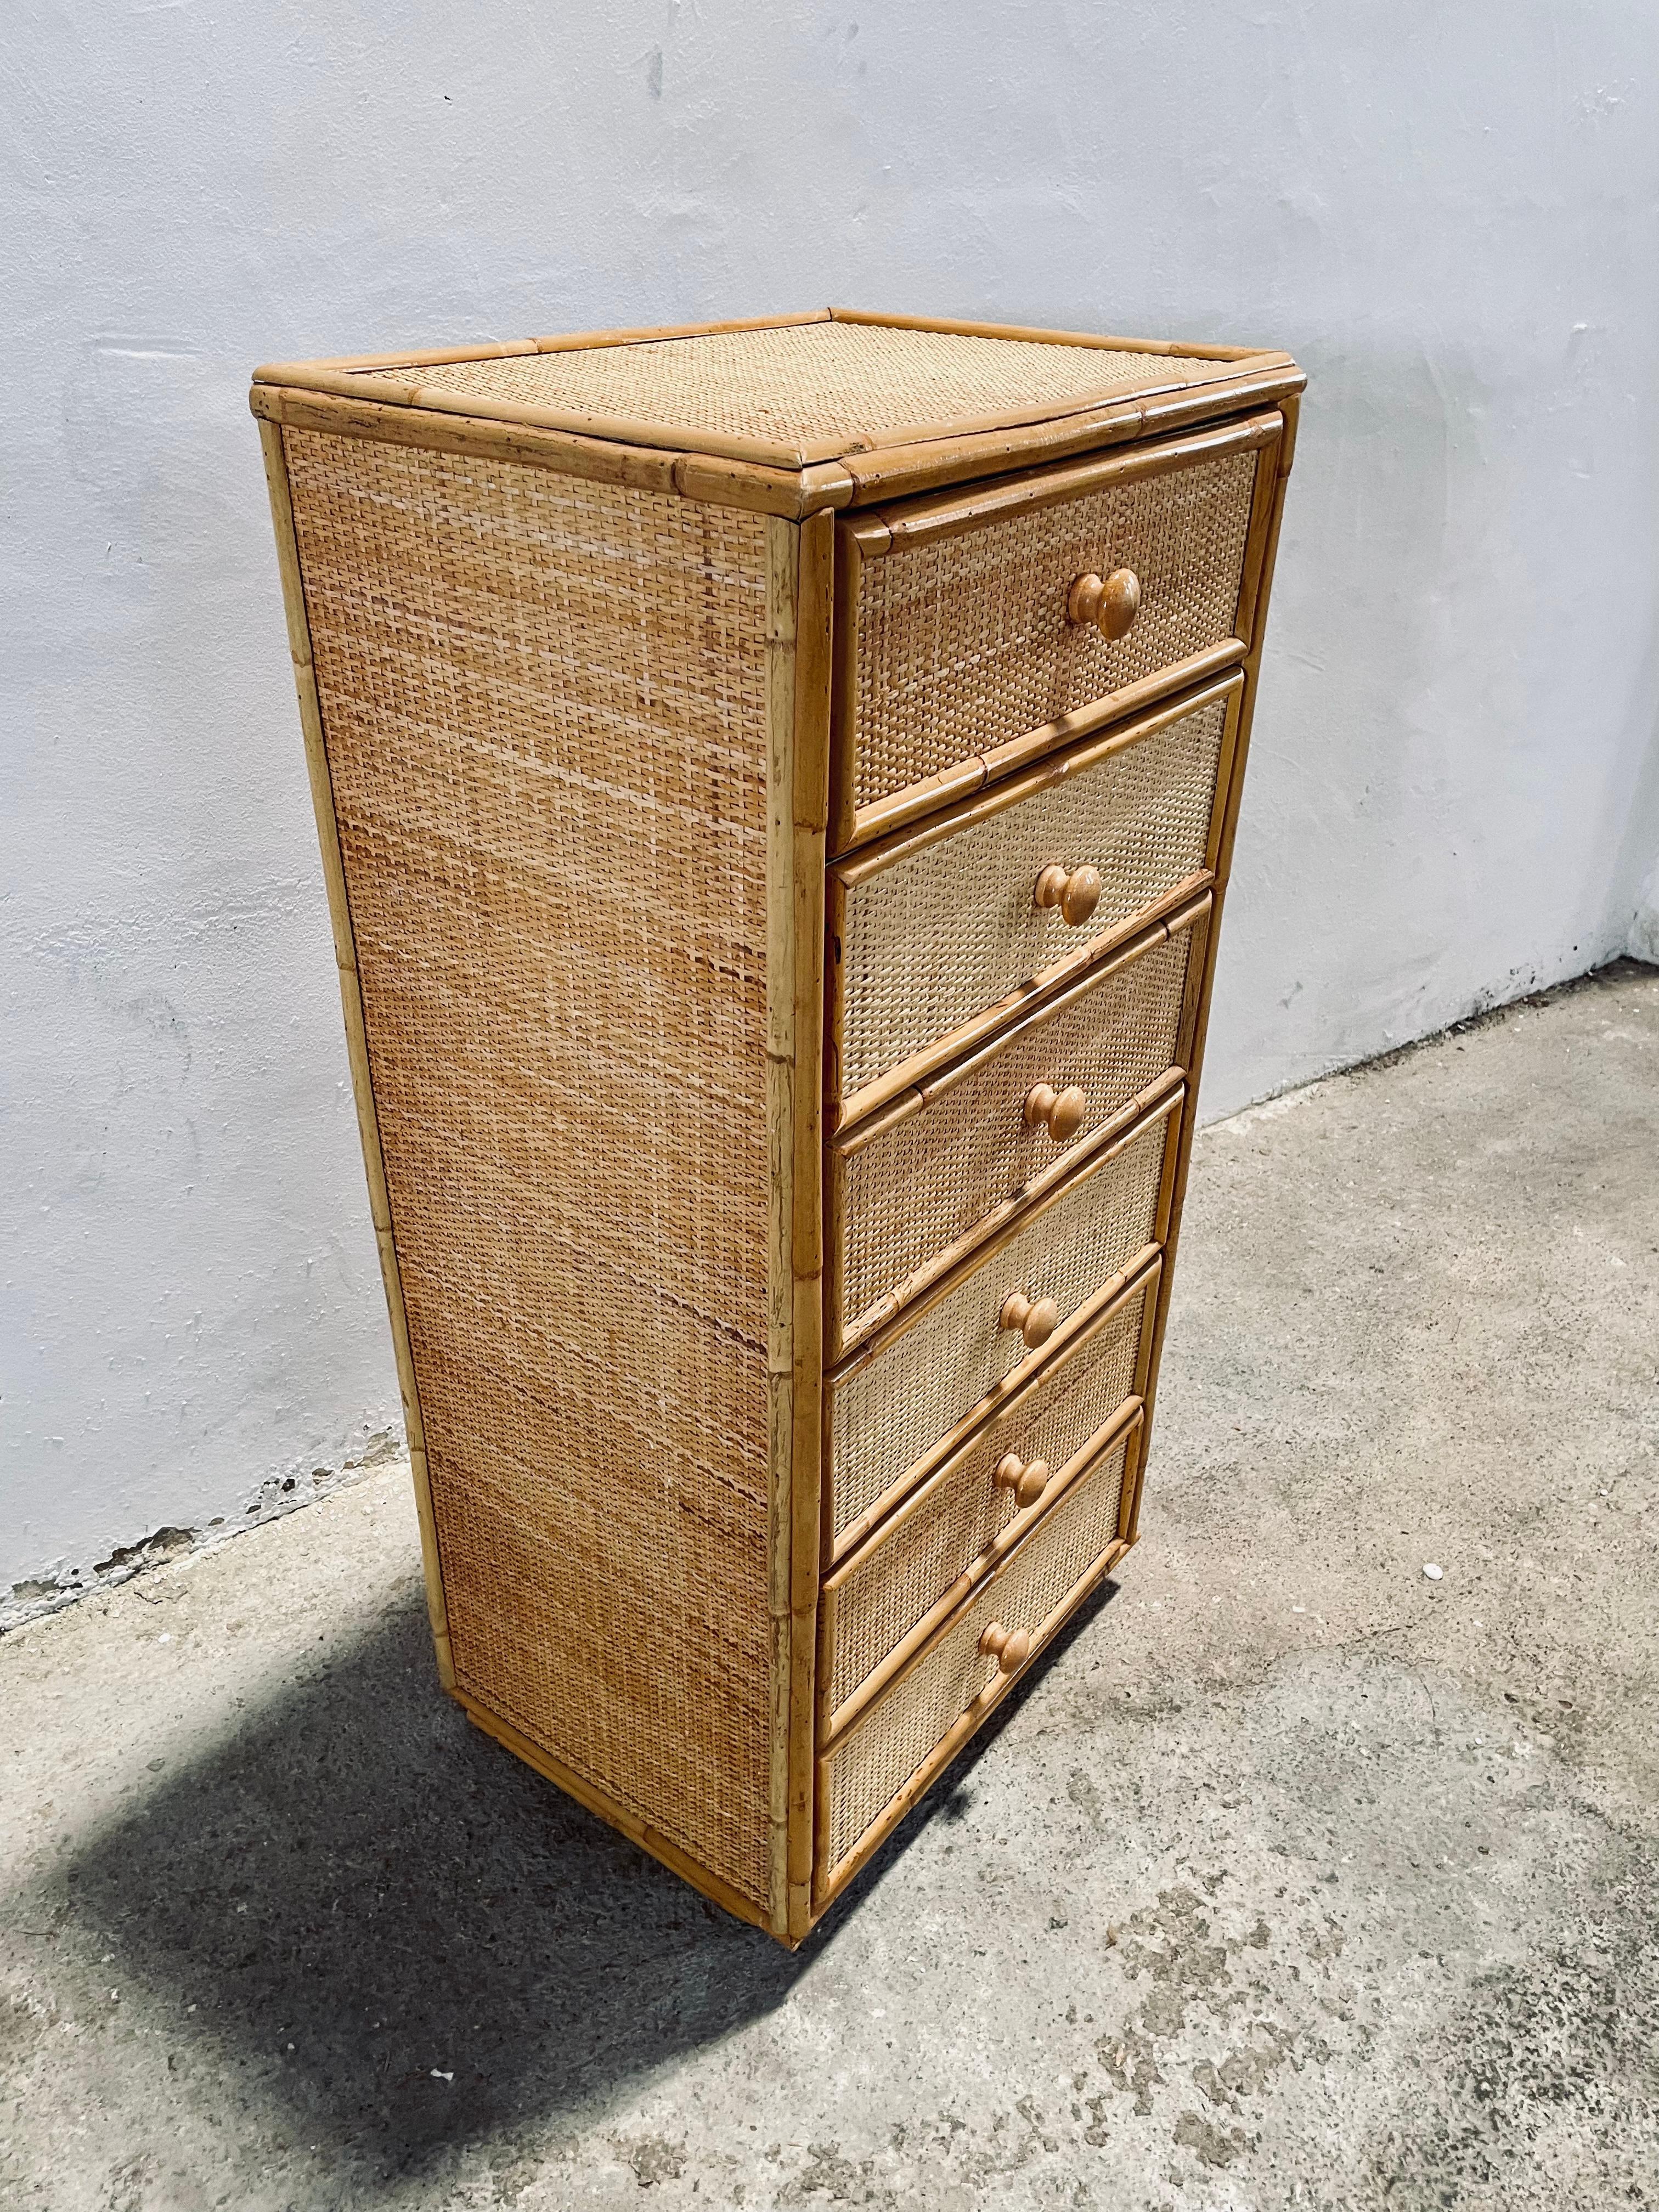 Vintage Bamboo and Rattan Chest of Drawers in the style of Pencil Reed originally from Spain circa 1960s
This vintage item remains fully functional, it shows minor sign of age through scuffs, dings, faded finishes, minor surface defects, minimal